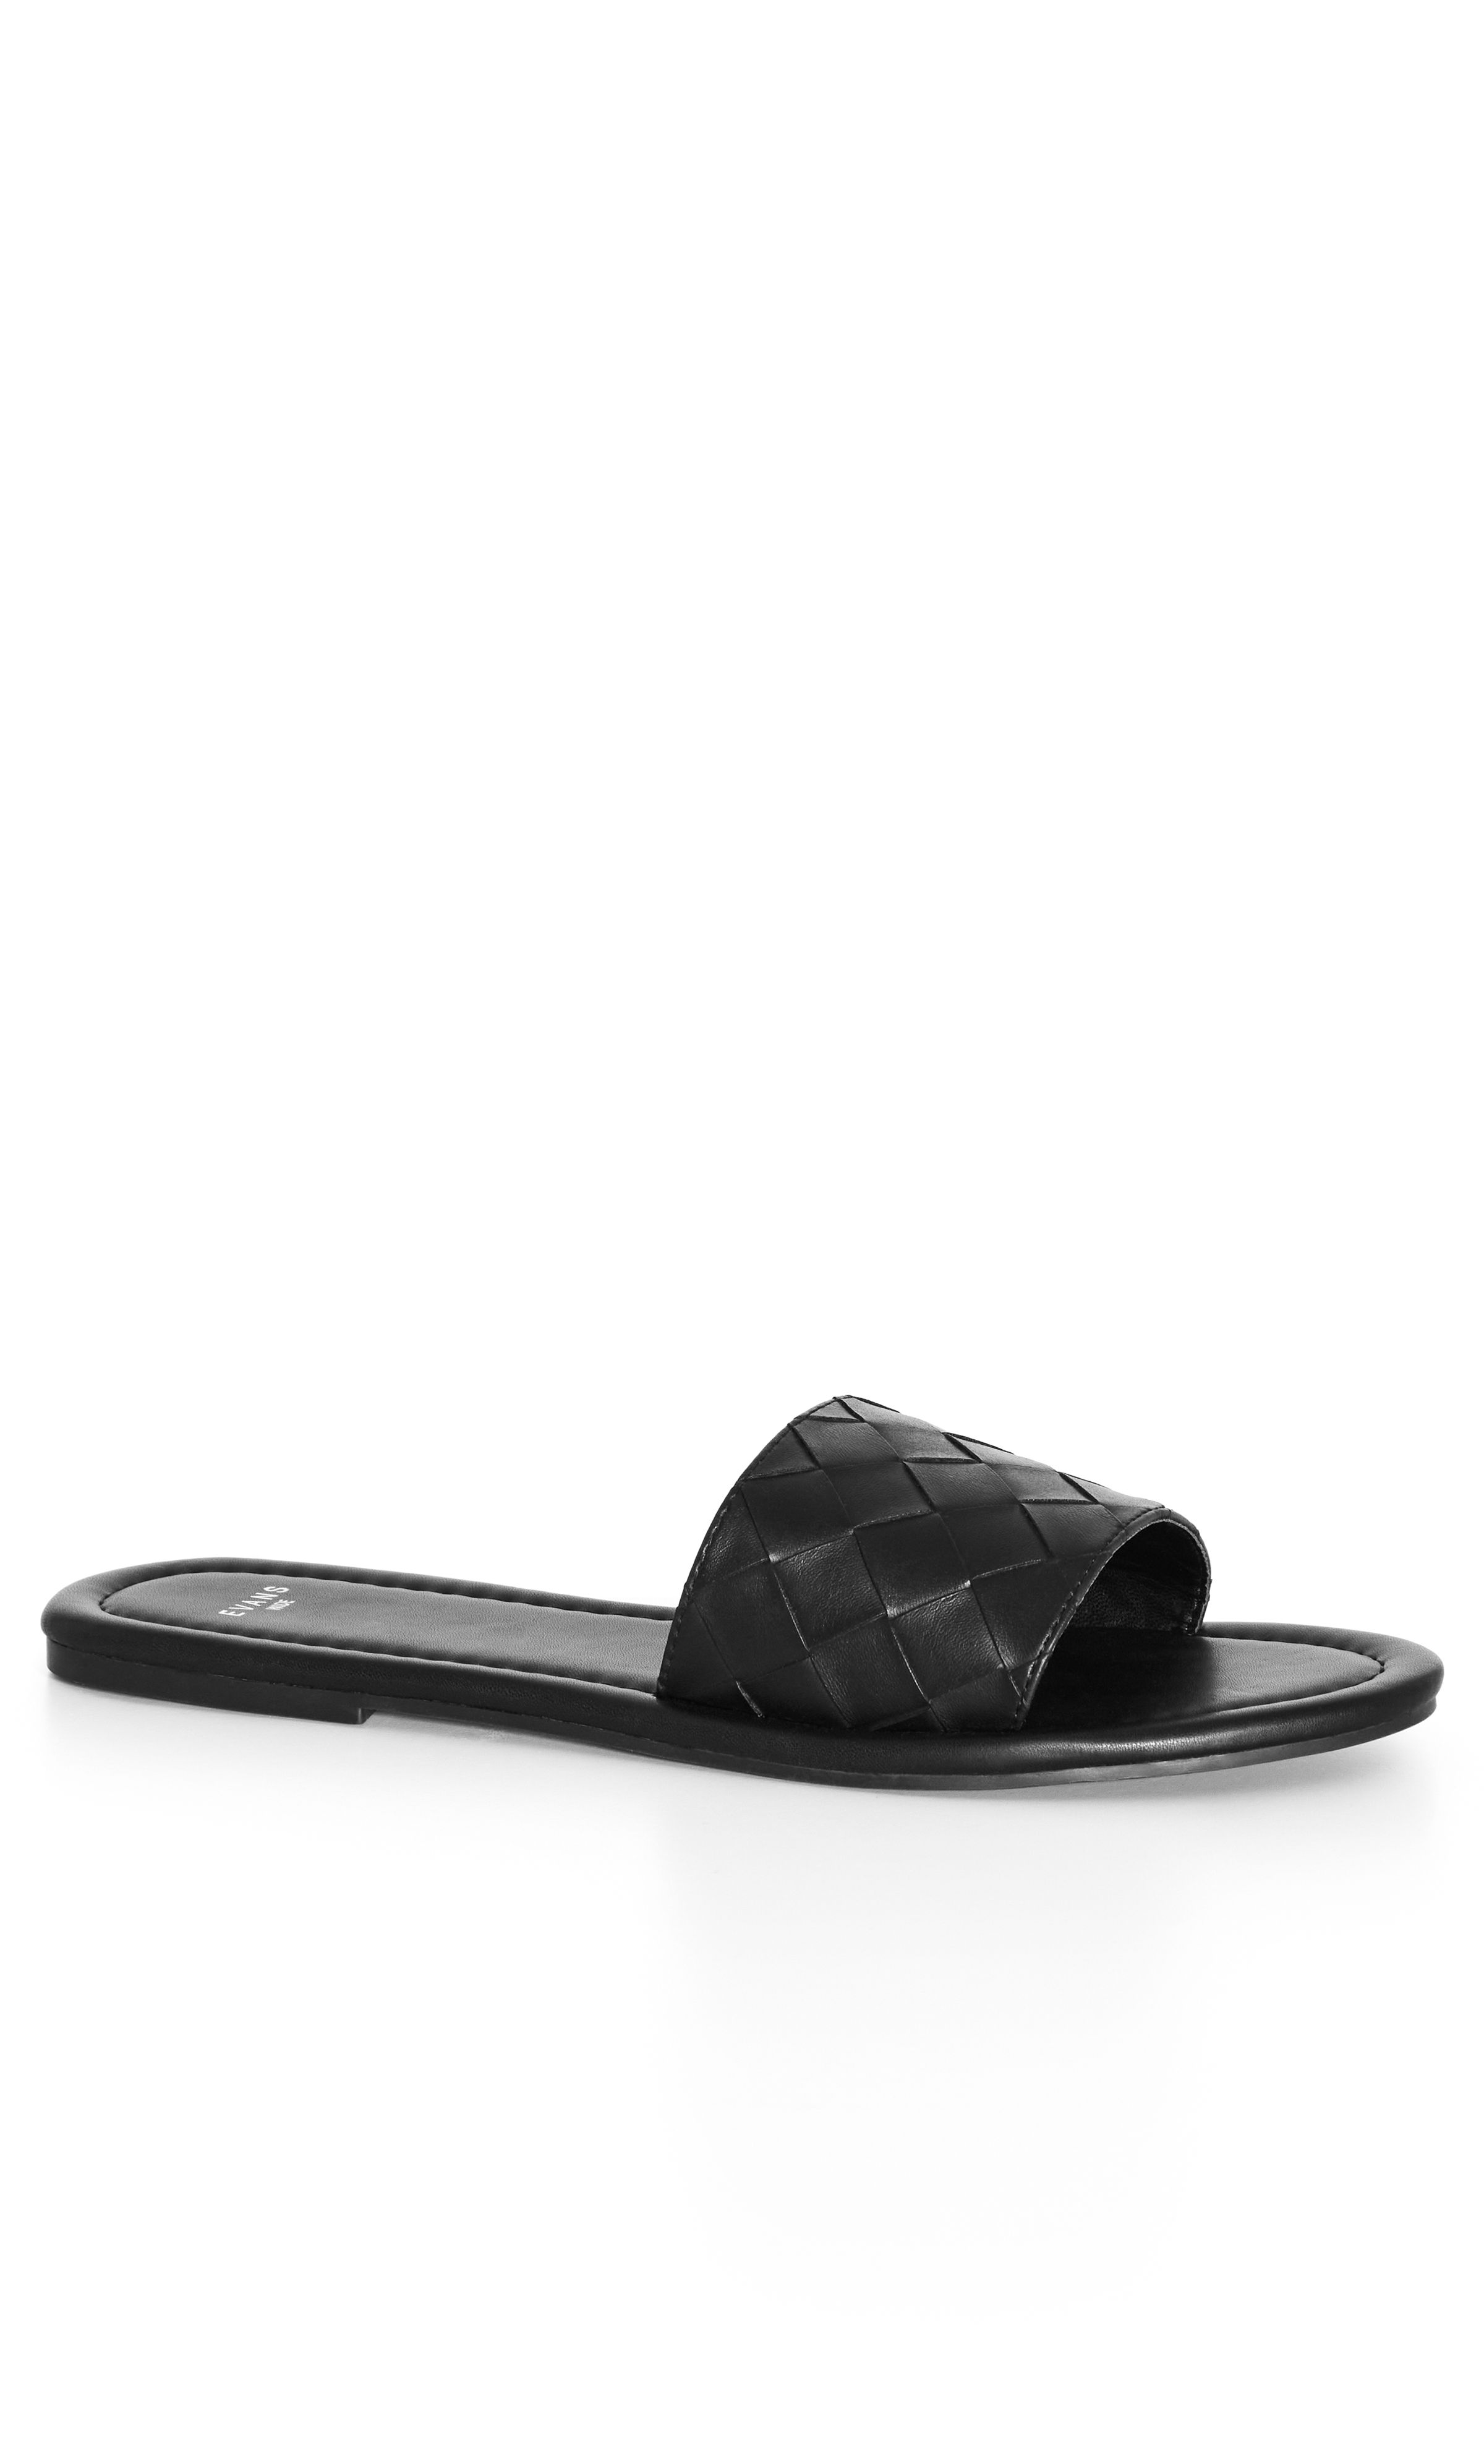 A sleek and chic addition to your footwear collection, the Weave Slide is a staple style for sunny summer days. Featuring a round open toe, weave detail and easy slip on style, these slides are the perfect on-the-go choice. Key Features Include: - Round open toe - Slip on style - Faux leather upper - Woven detail For a laidback weekend look, team these slides with cropped jeans and a breezy blouse.